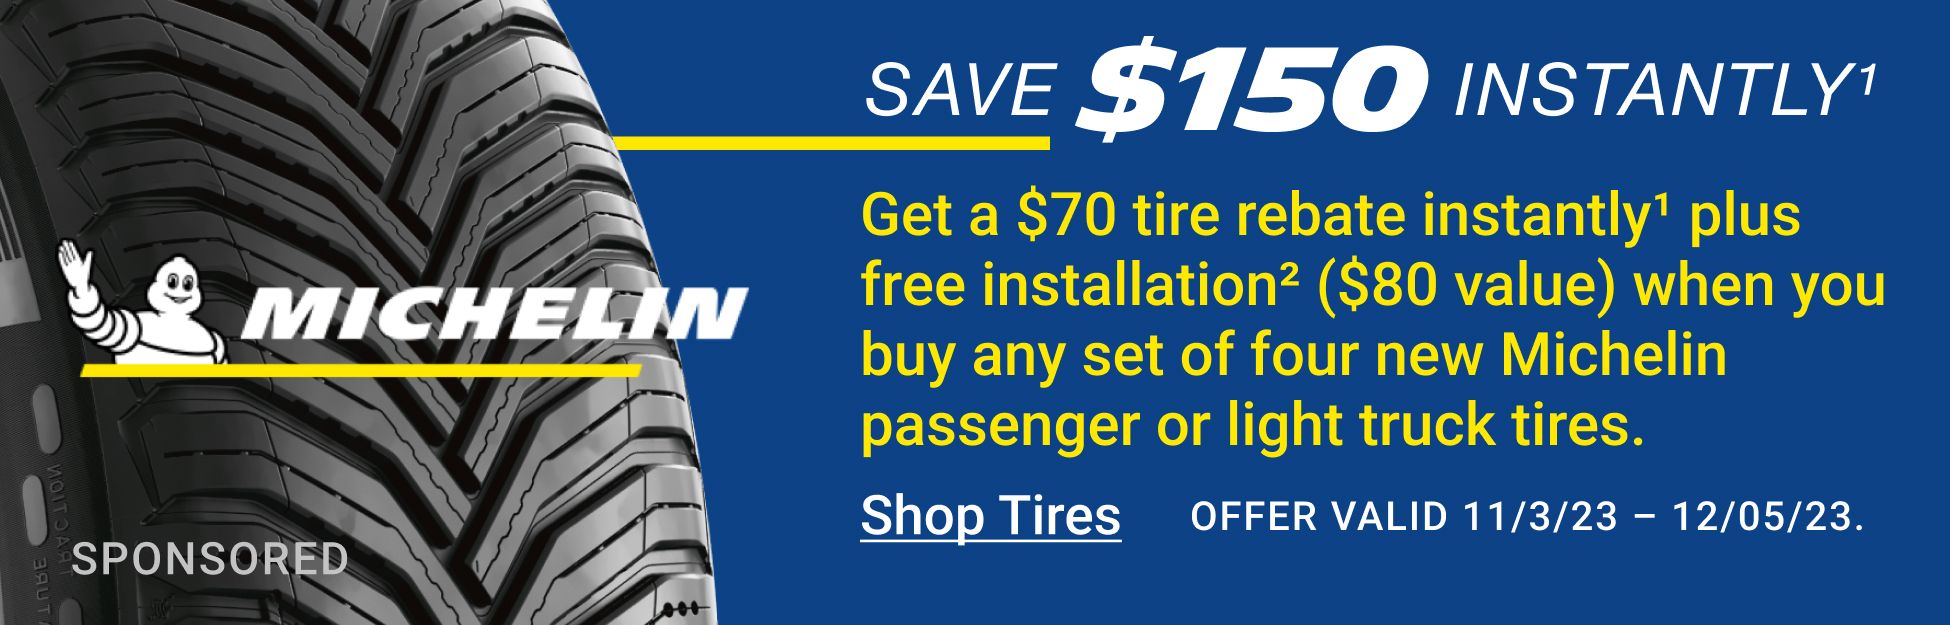 Save $150 instantly. Get a $70 tire rebate instantly1 plus free installation2 ($80 value) when you buy any set of four new Michelin passenger or light truck tires. Offer Valid 11/03/23 through 12/05/23 Click here to shop tires.